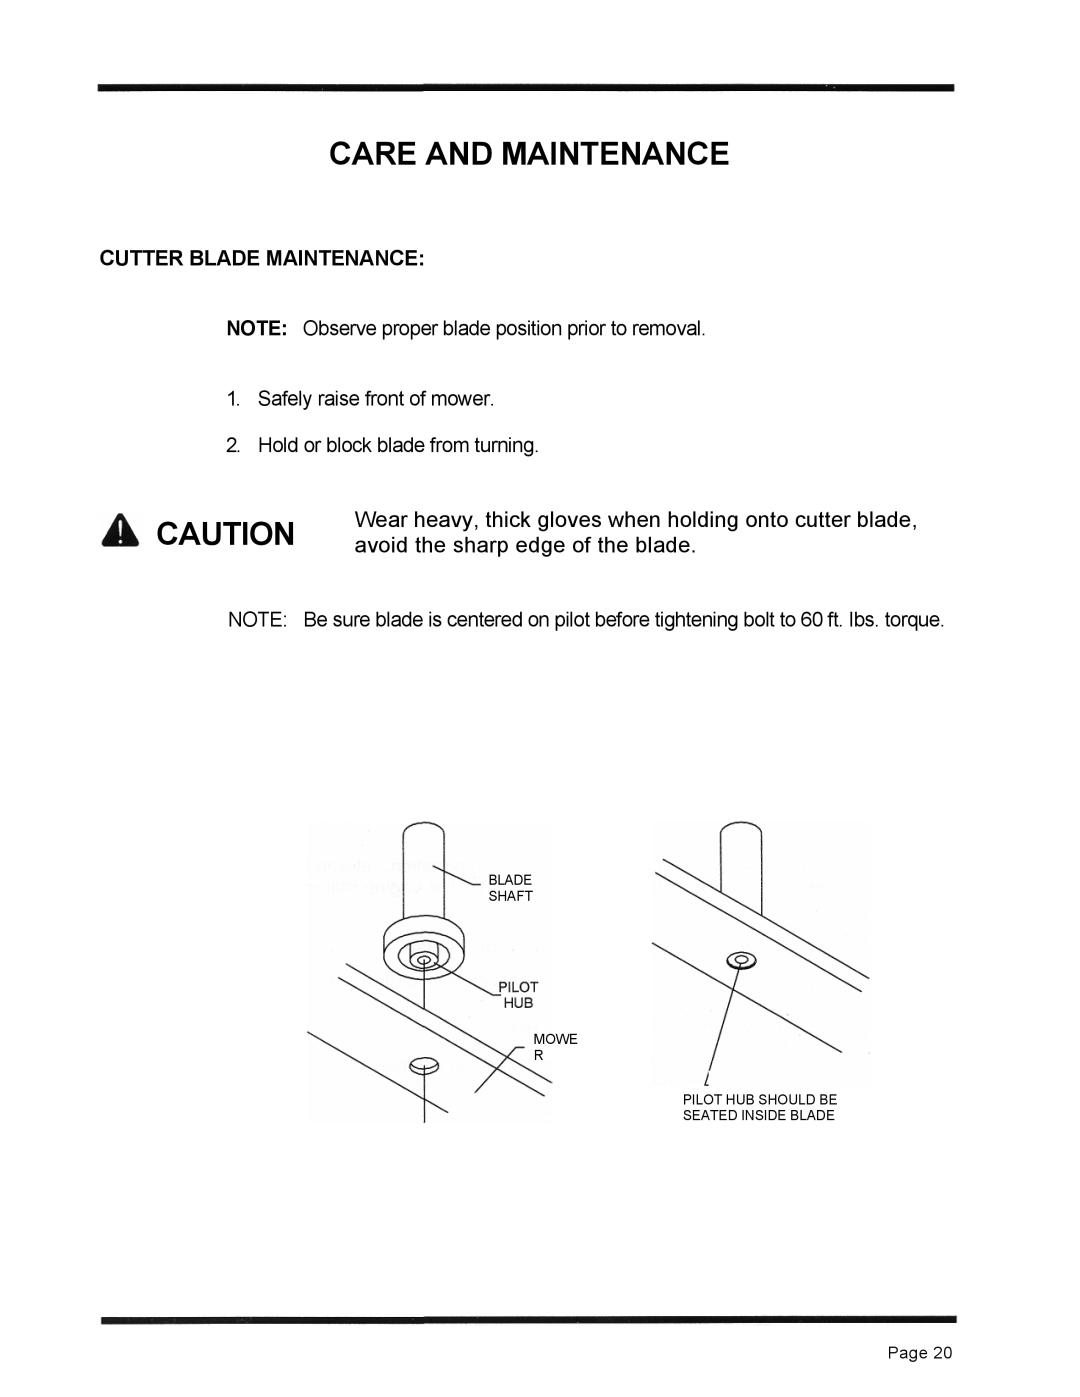 Dixon 6601 Series manual Care And Maintenance, avoid the sharp edge of the blade, Cutter Blade Maintenance, Page 